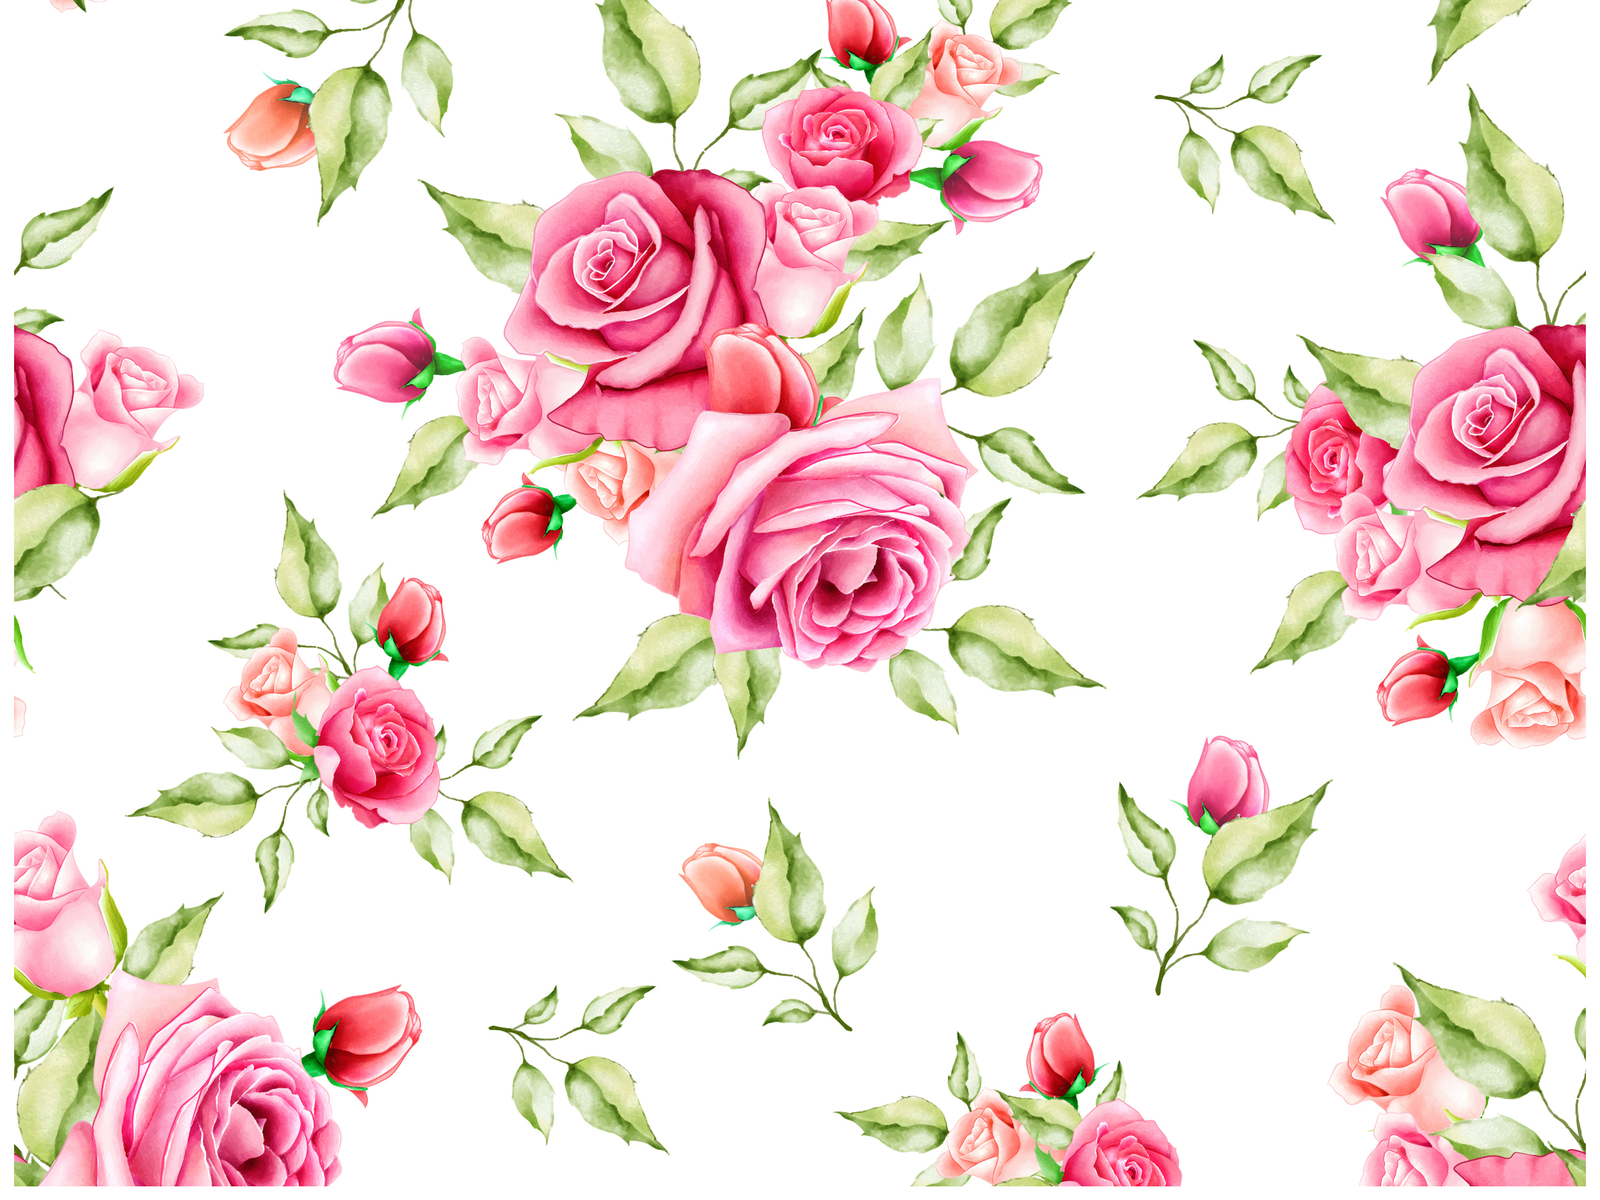 watercolor floral and leaves seamless pattern by volcebyyou Studio on ...